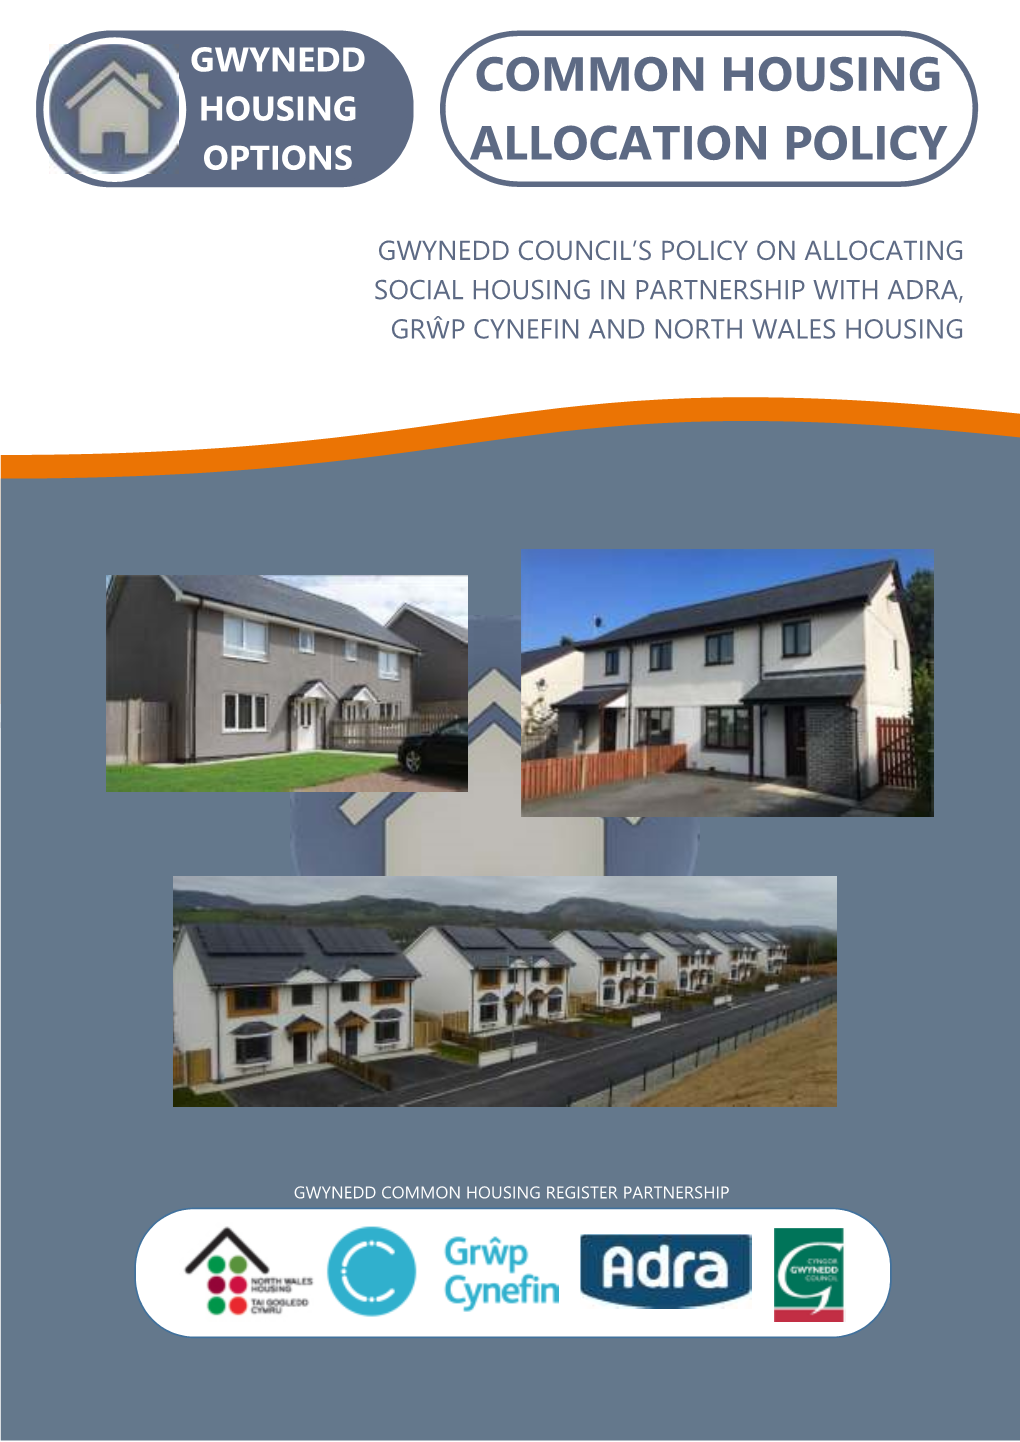 Common Housing Allocation Policy 2 the Legal Framework 2 Equality and Diversity 4 Language 5